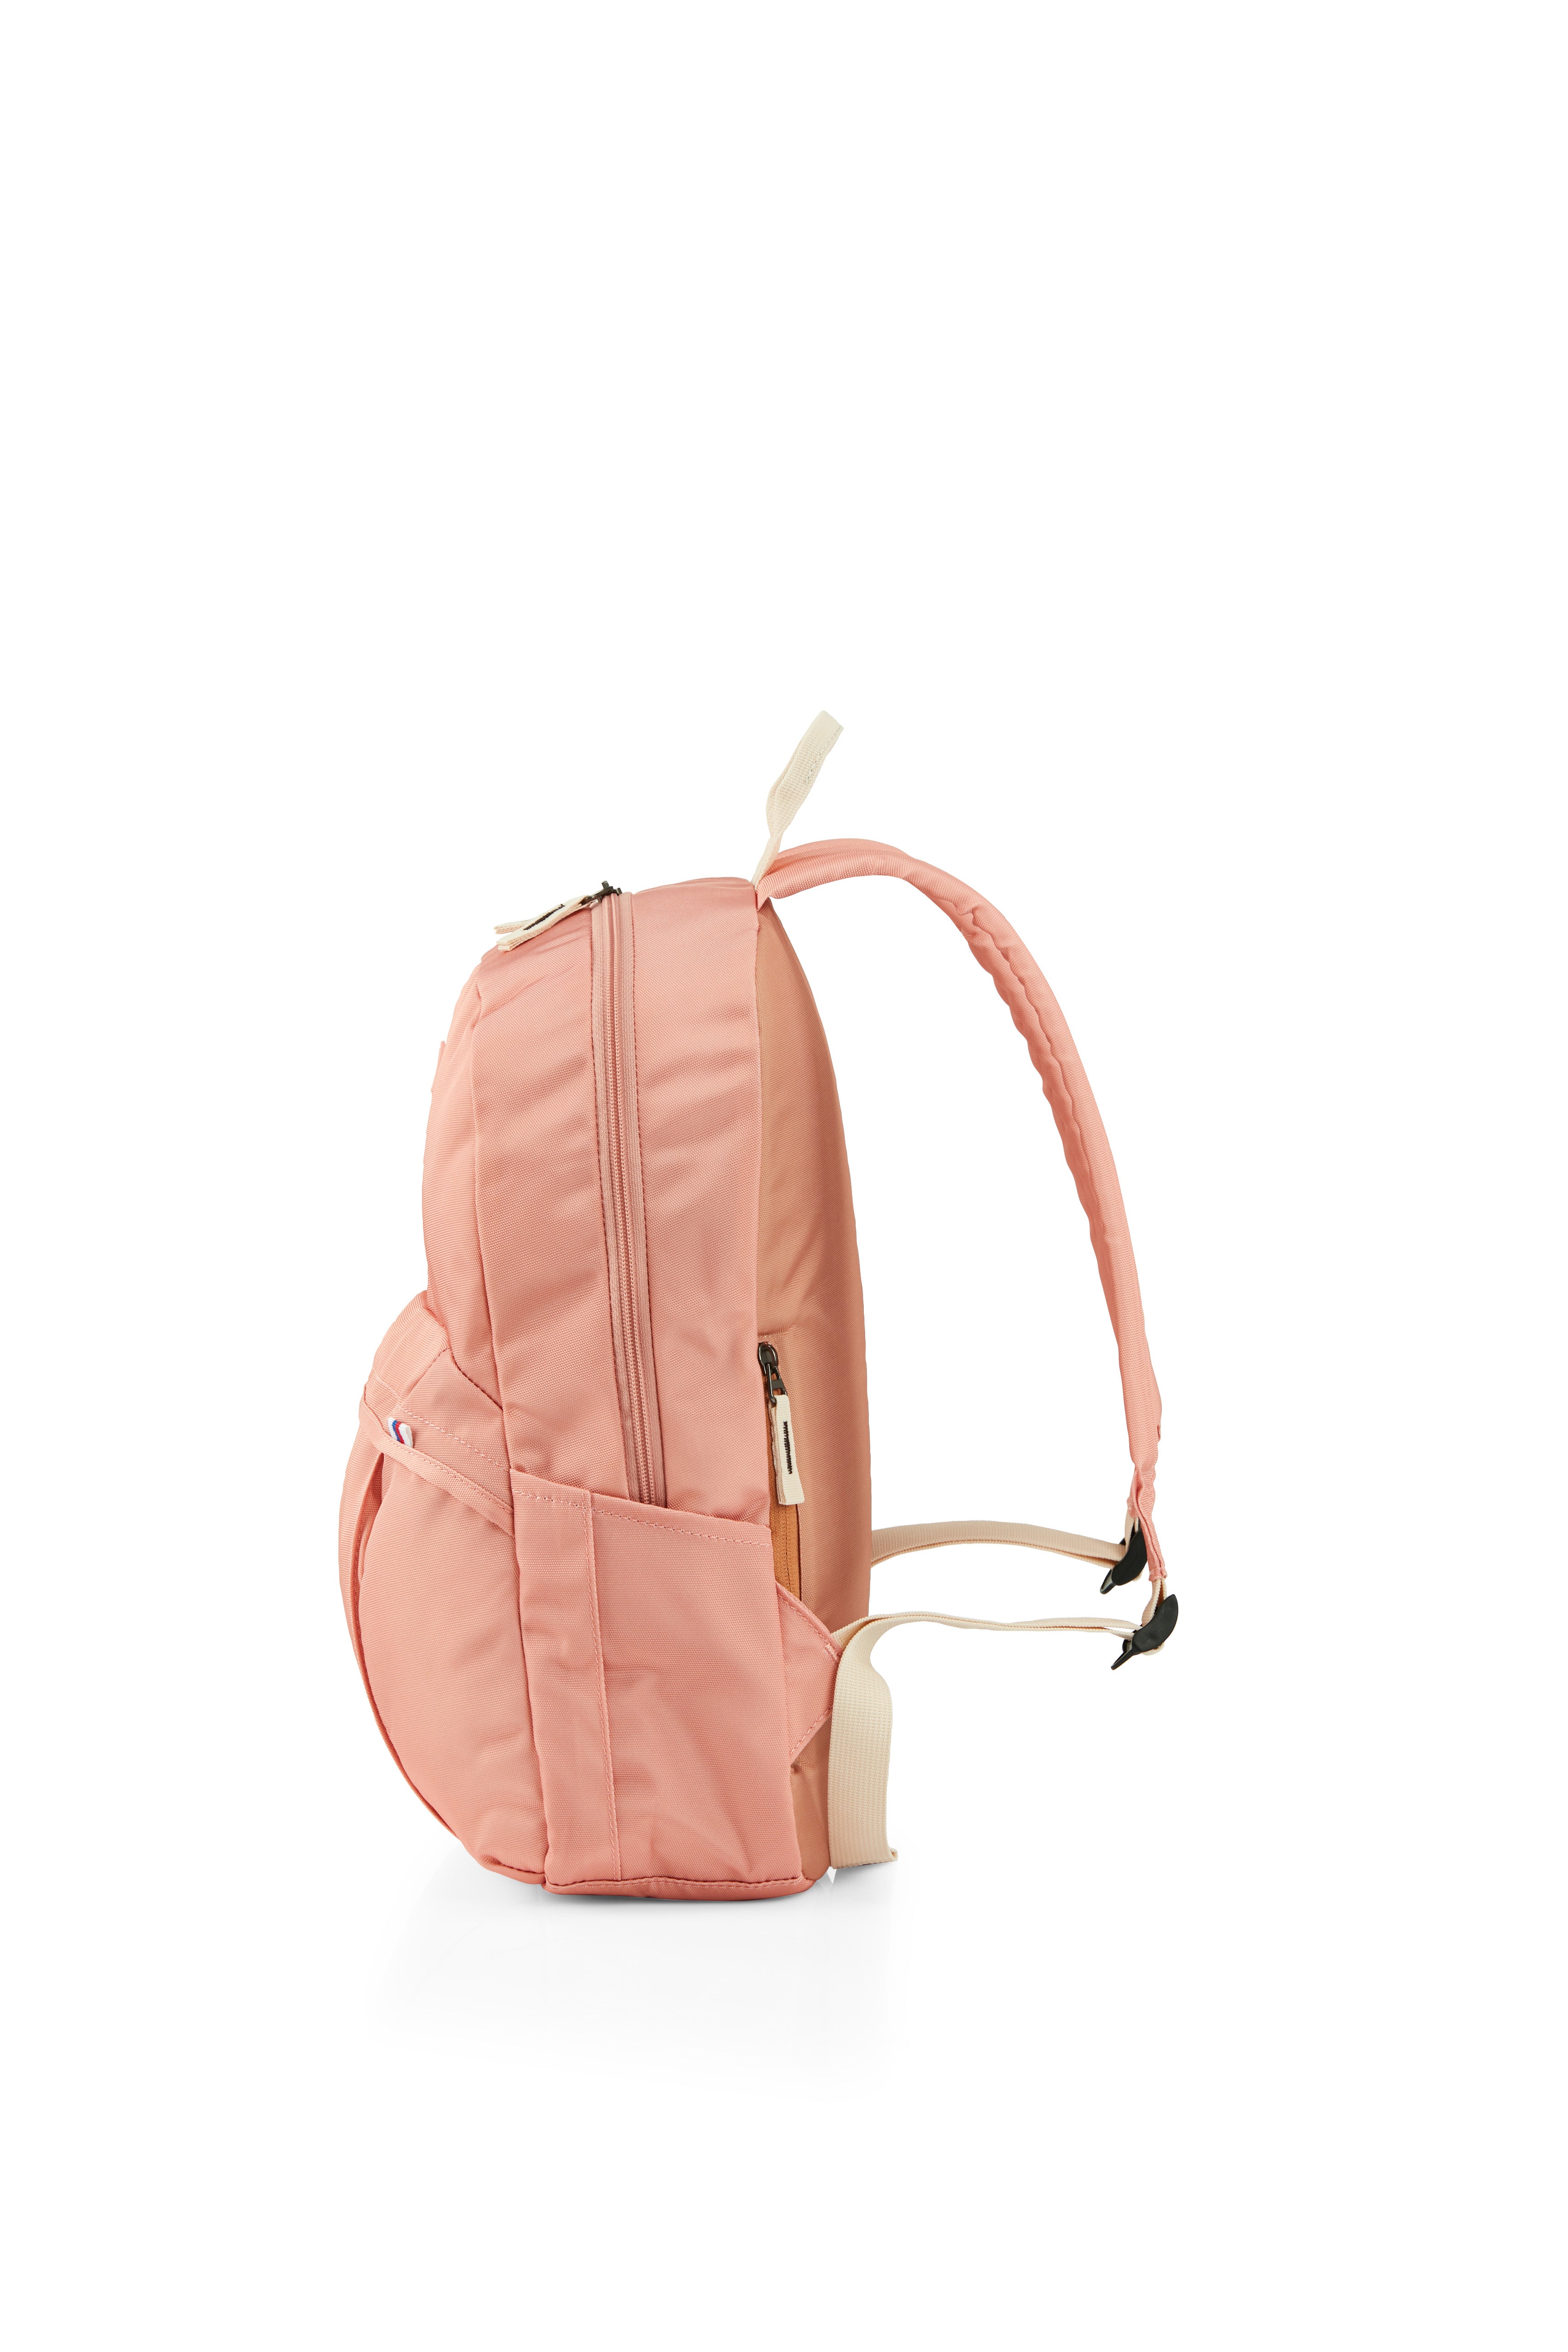 American Tourister - RUDY Small Fashion Backpack - Apricot Ice-3